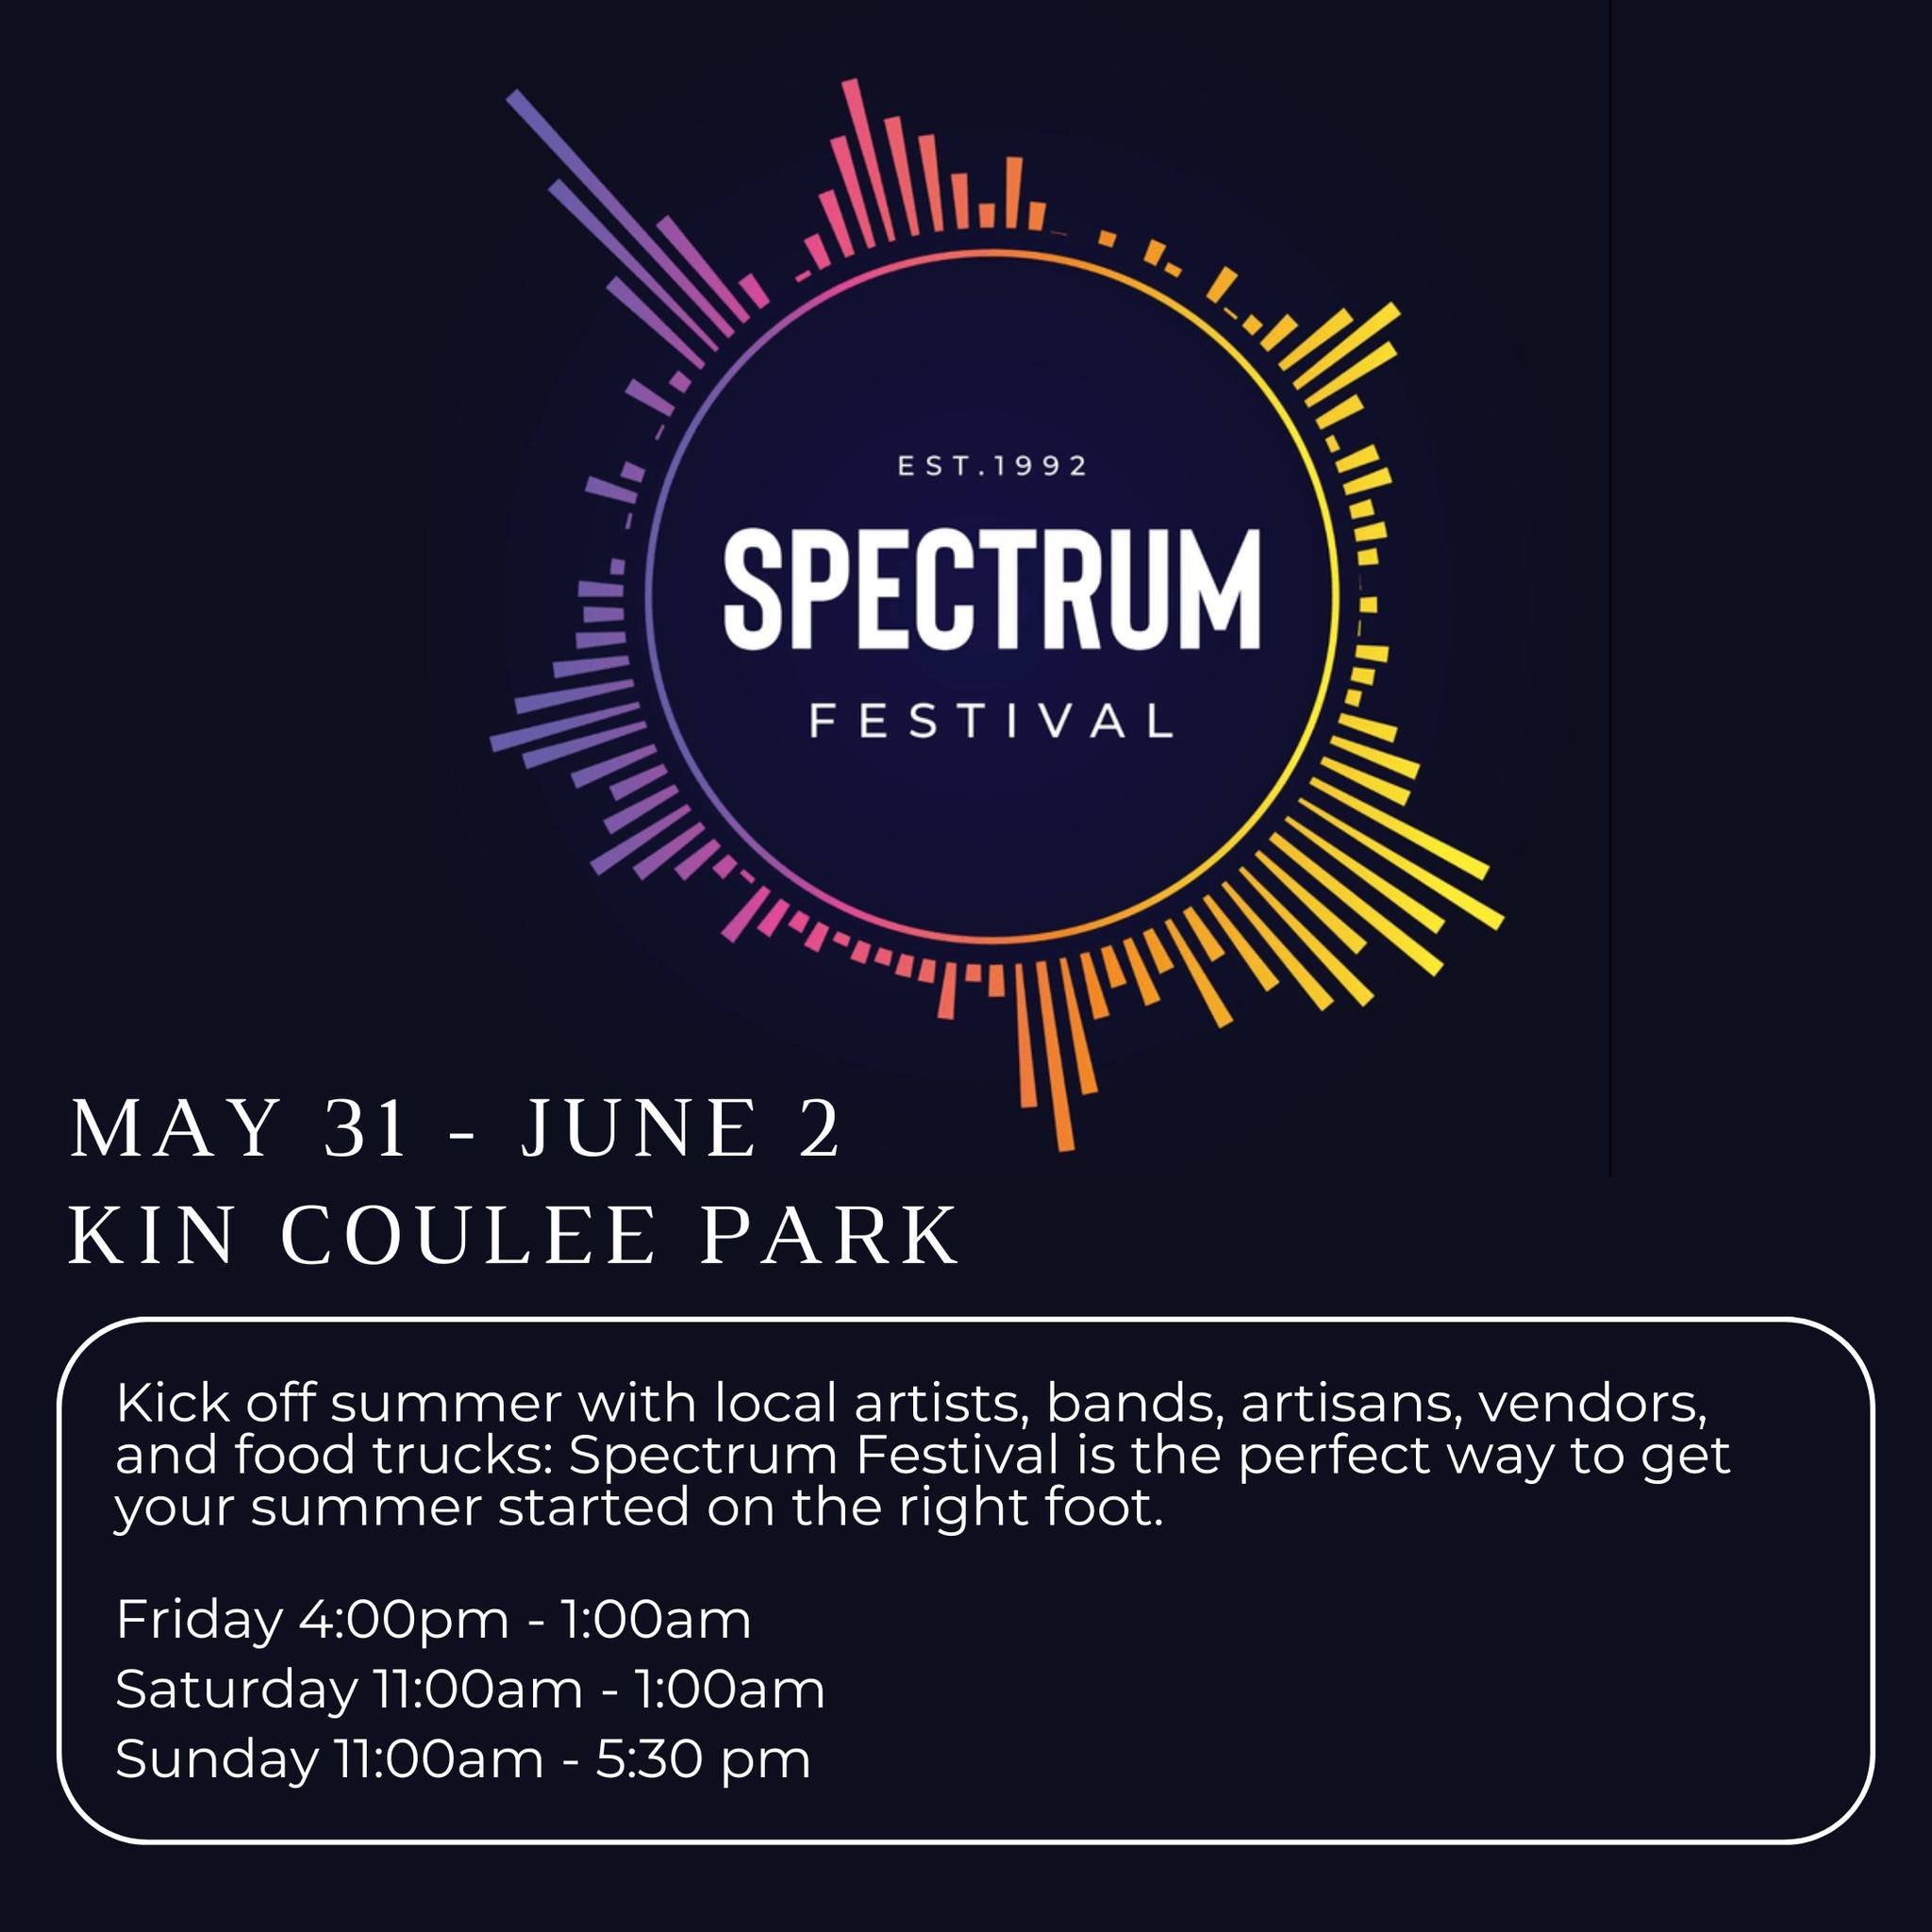 Summer in Medicine Hat kicks off with the highly anticipated Spectrum Festival!

This festival is a must-visit for anyone eager to dive into the vibrant local culture and talent. The event runs from 4 PM to 1 AM on Friday, 11 AM to 1 AM on Saturday, 